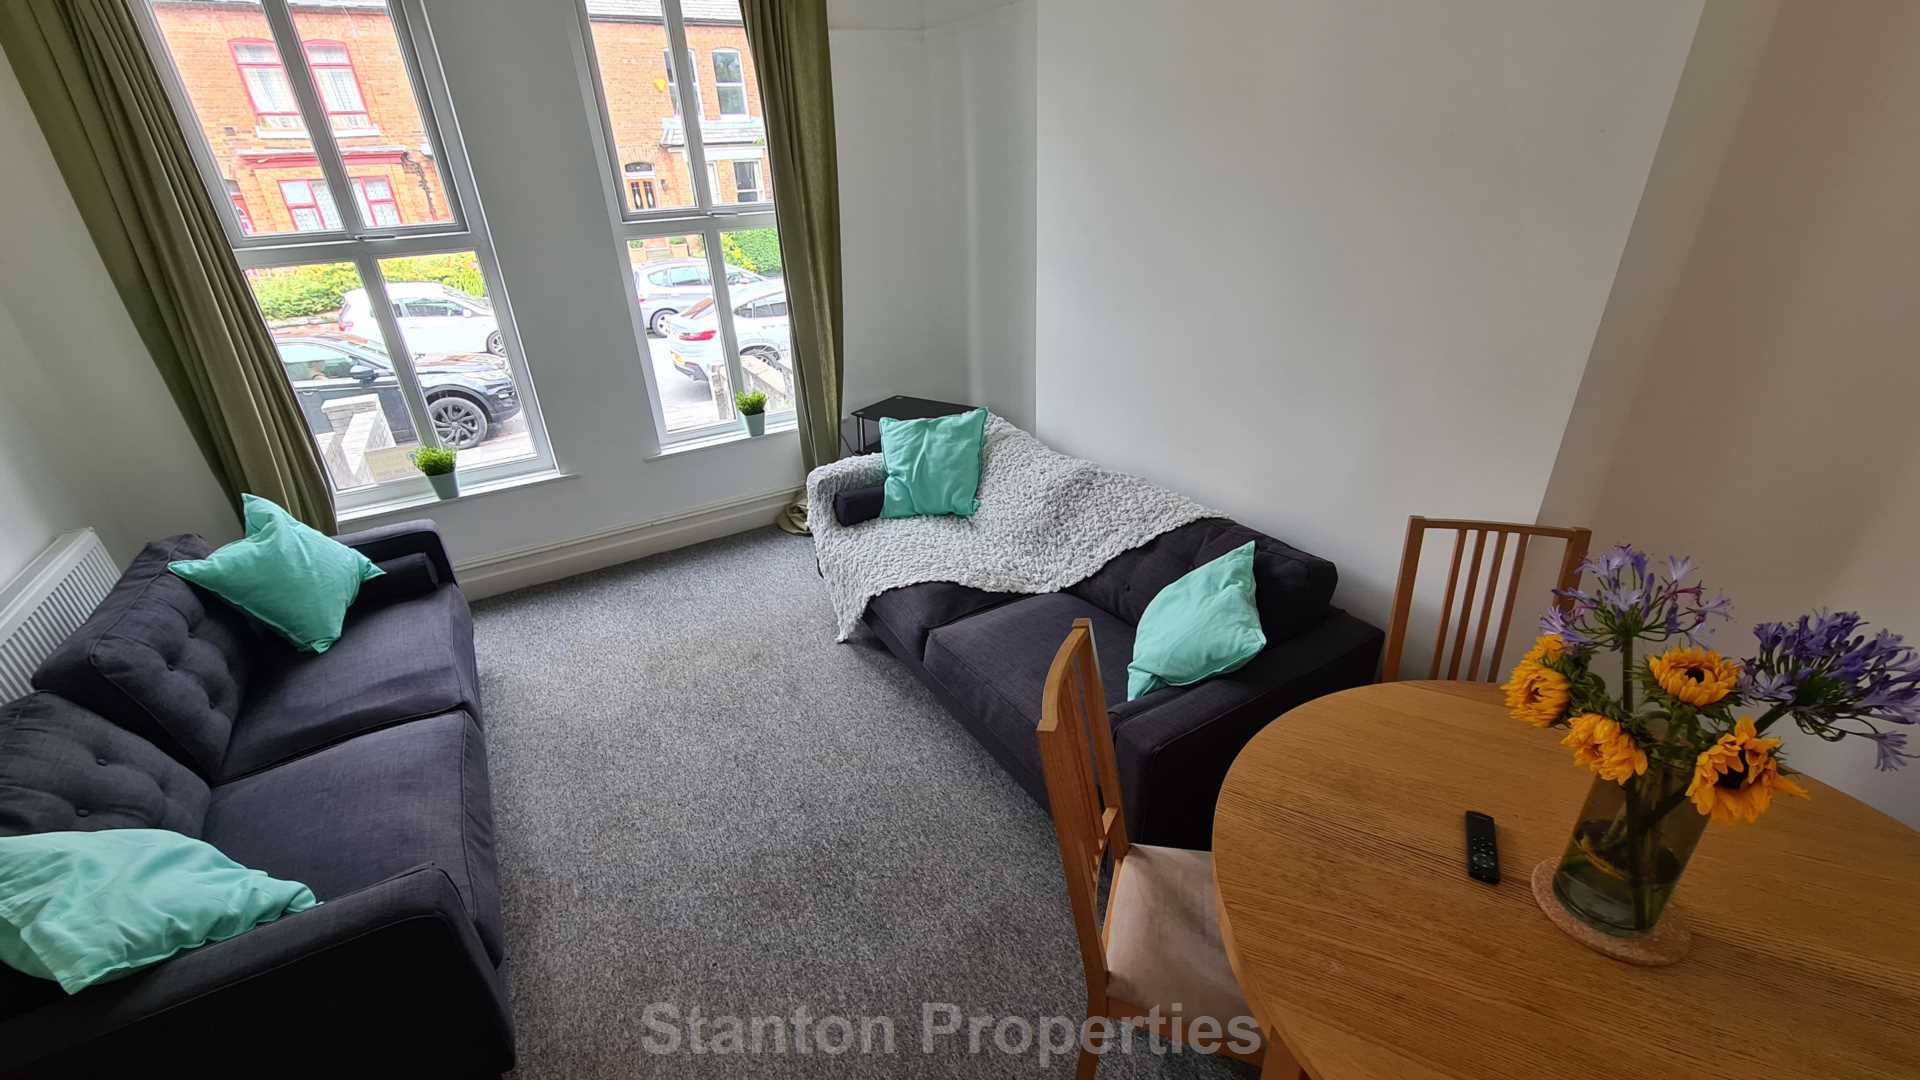 £137 pppw, See Video Tour, Lombard Grove, Fallowfield, Image 1